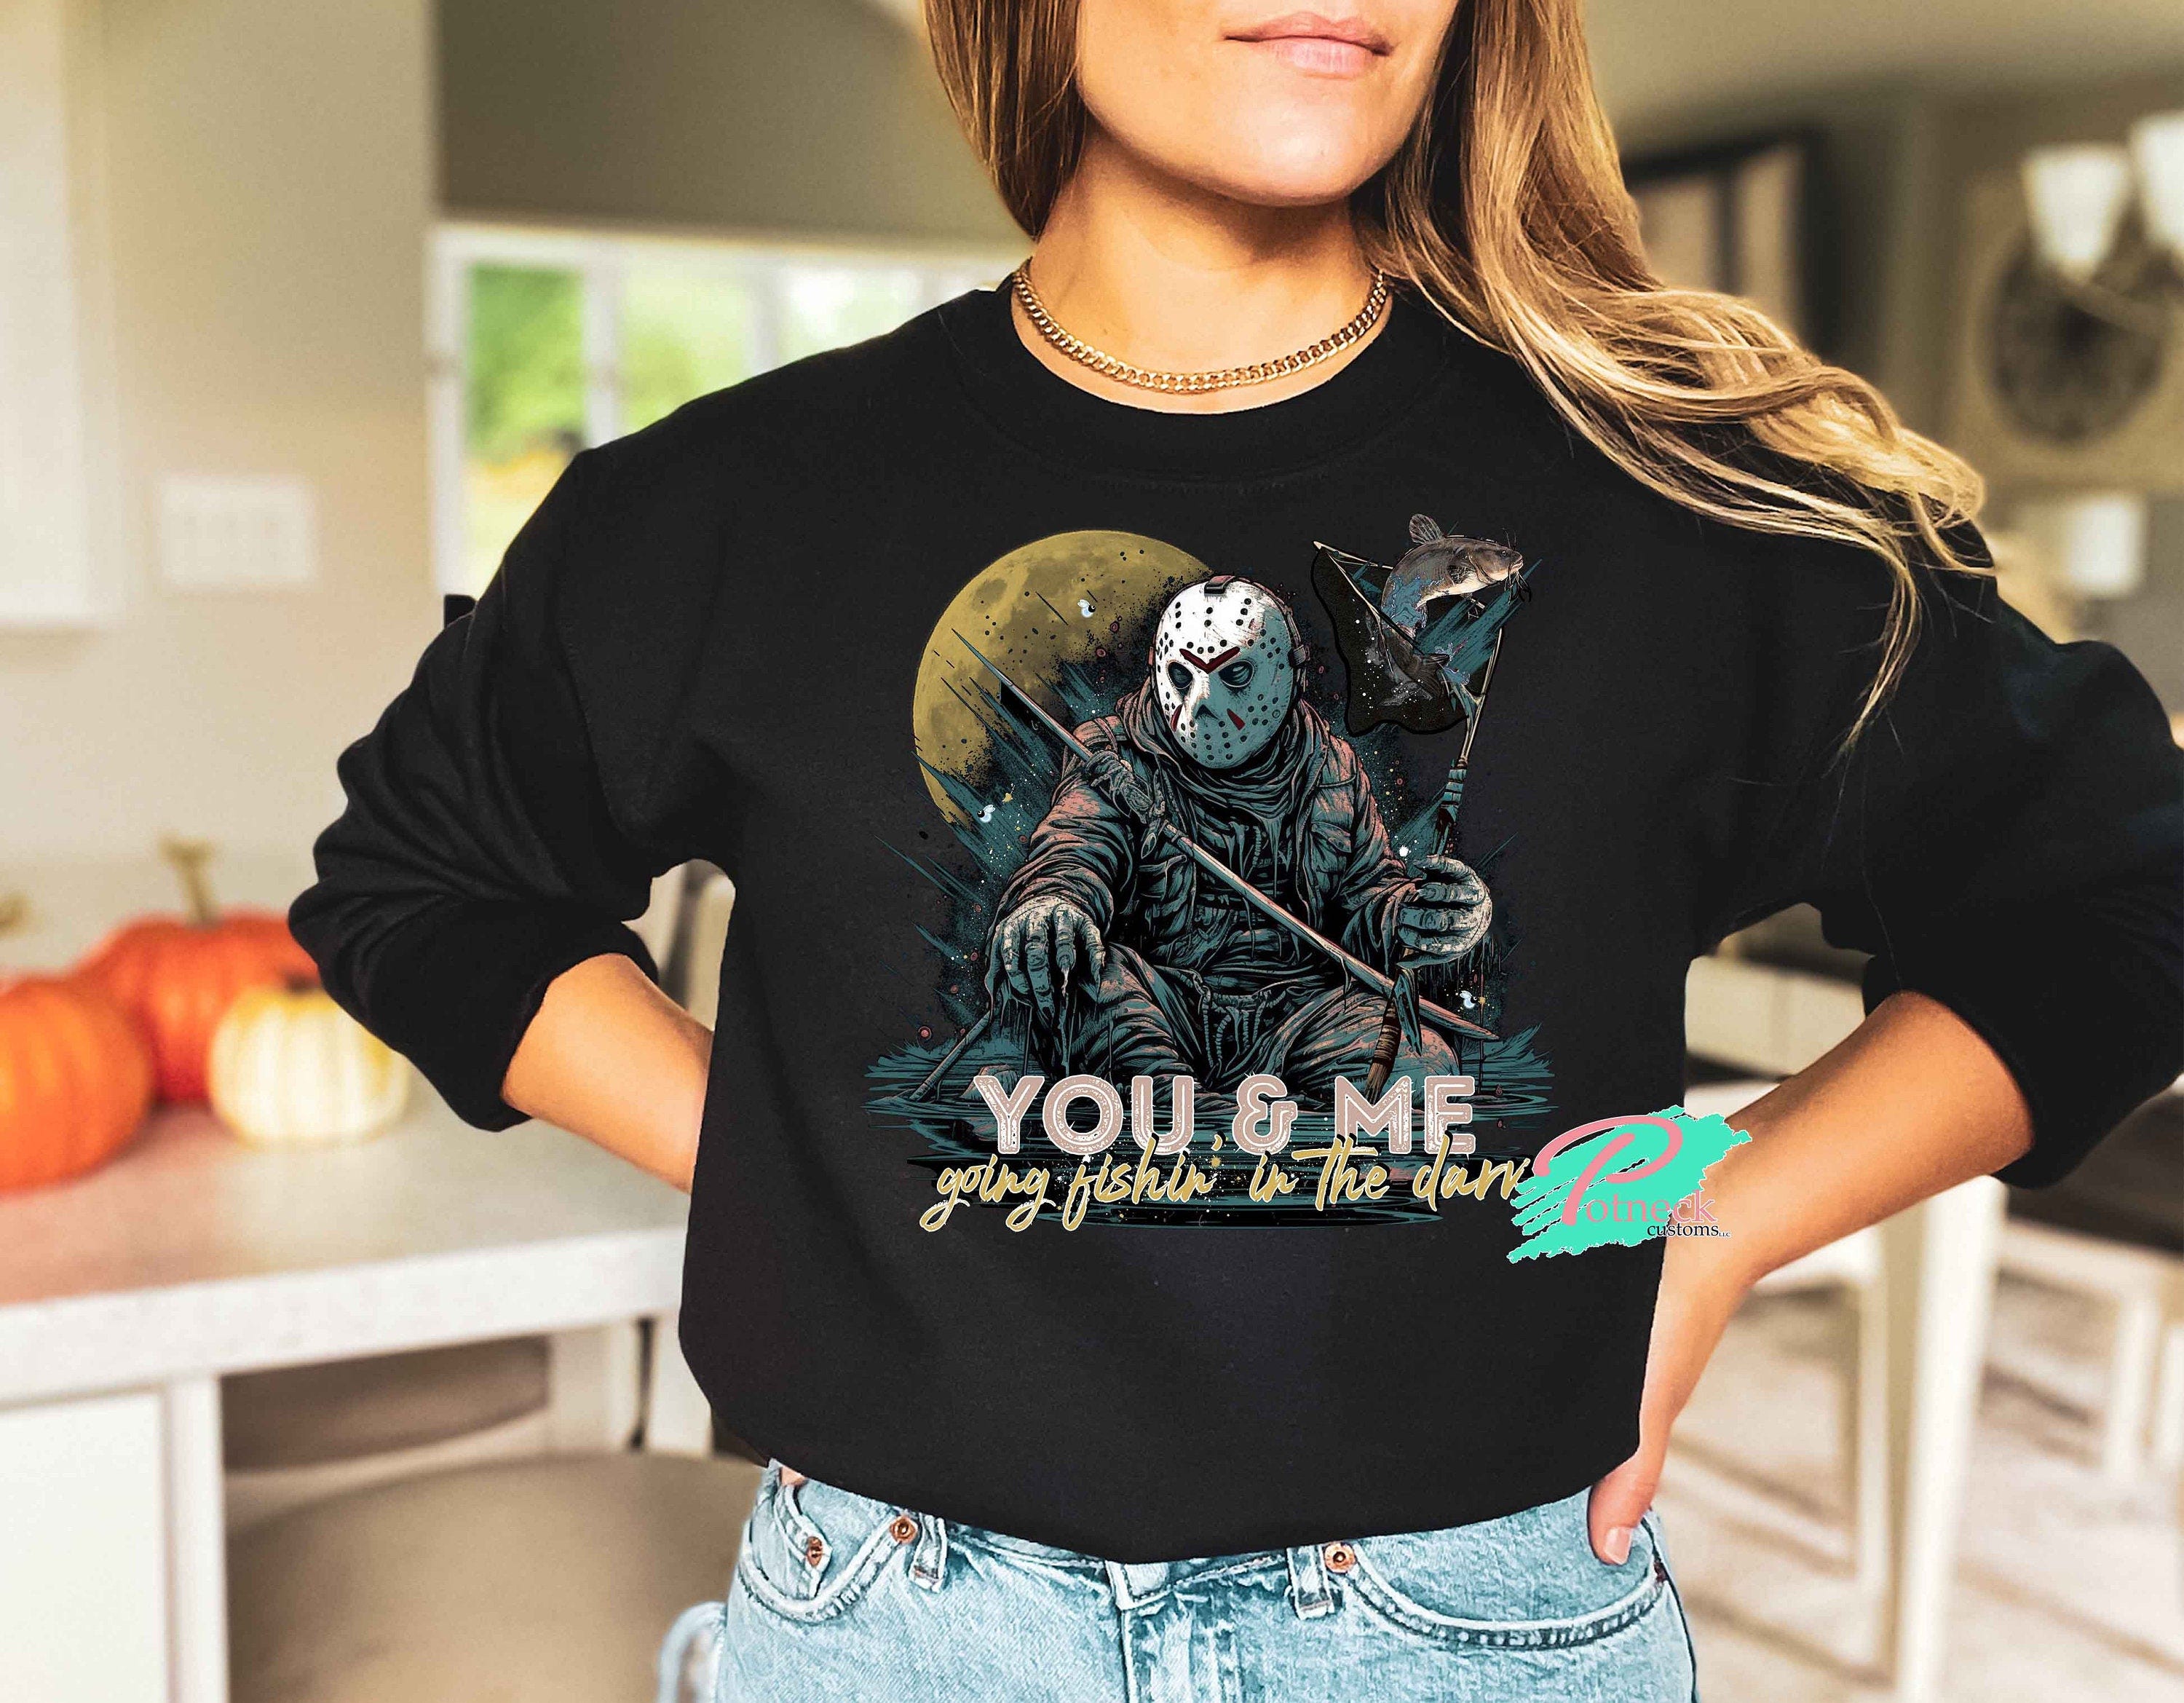 You and me fishing in the dark horror sweatshirt with iconic horror character